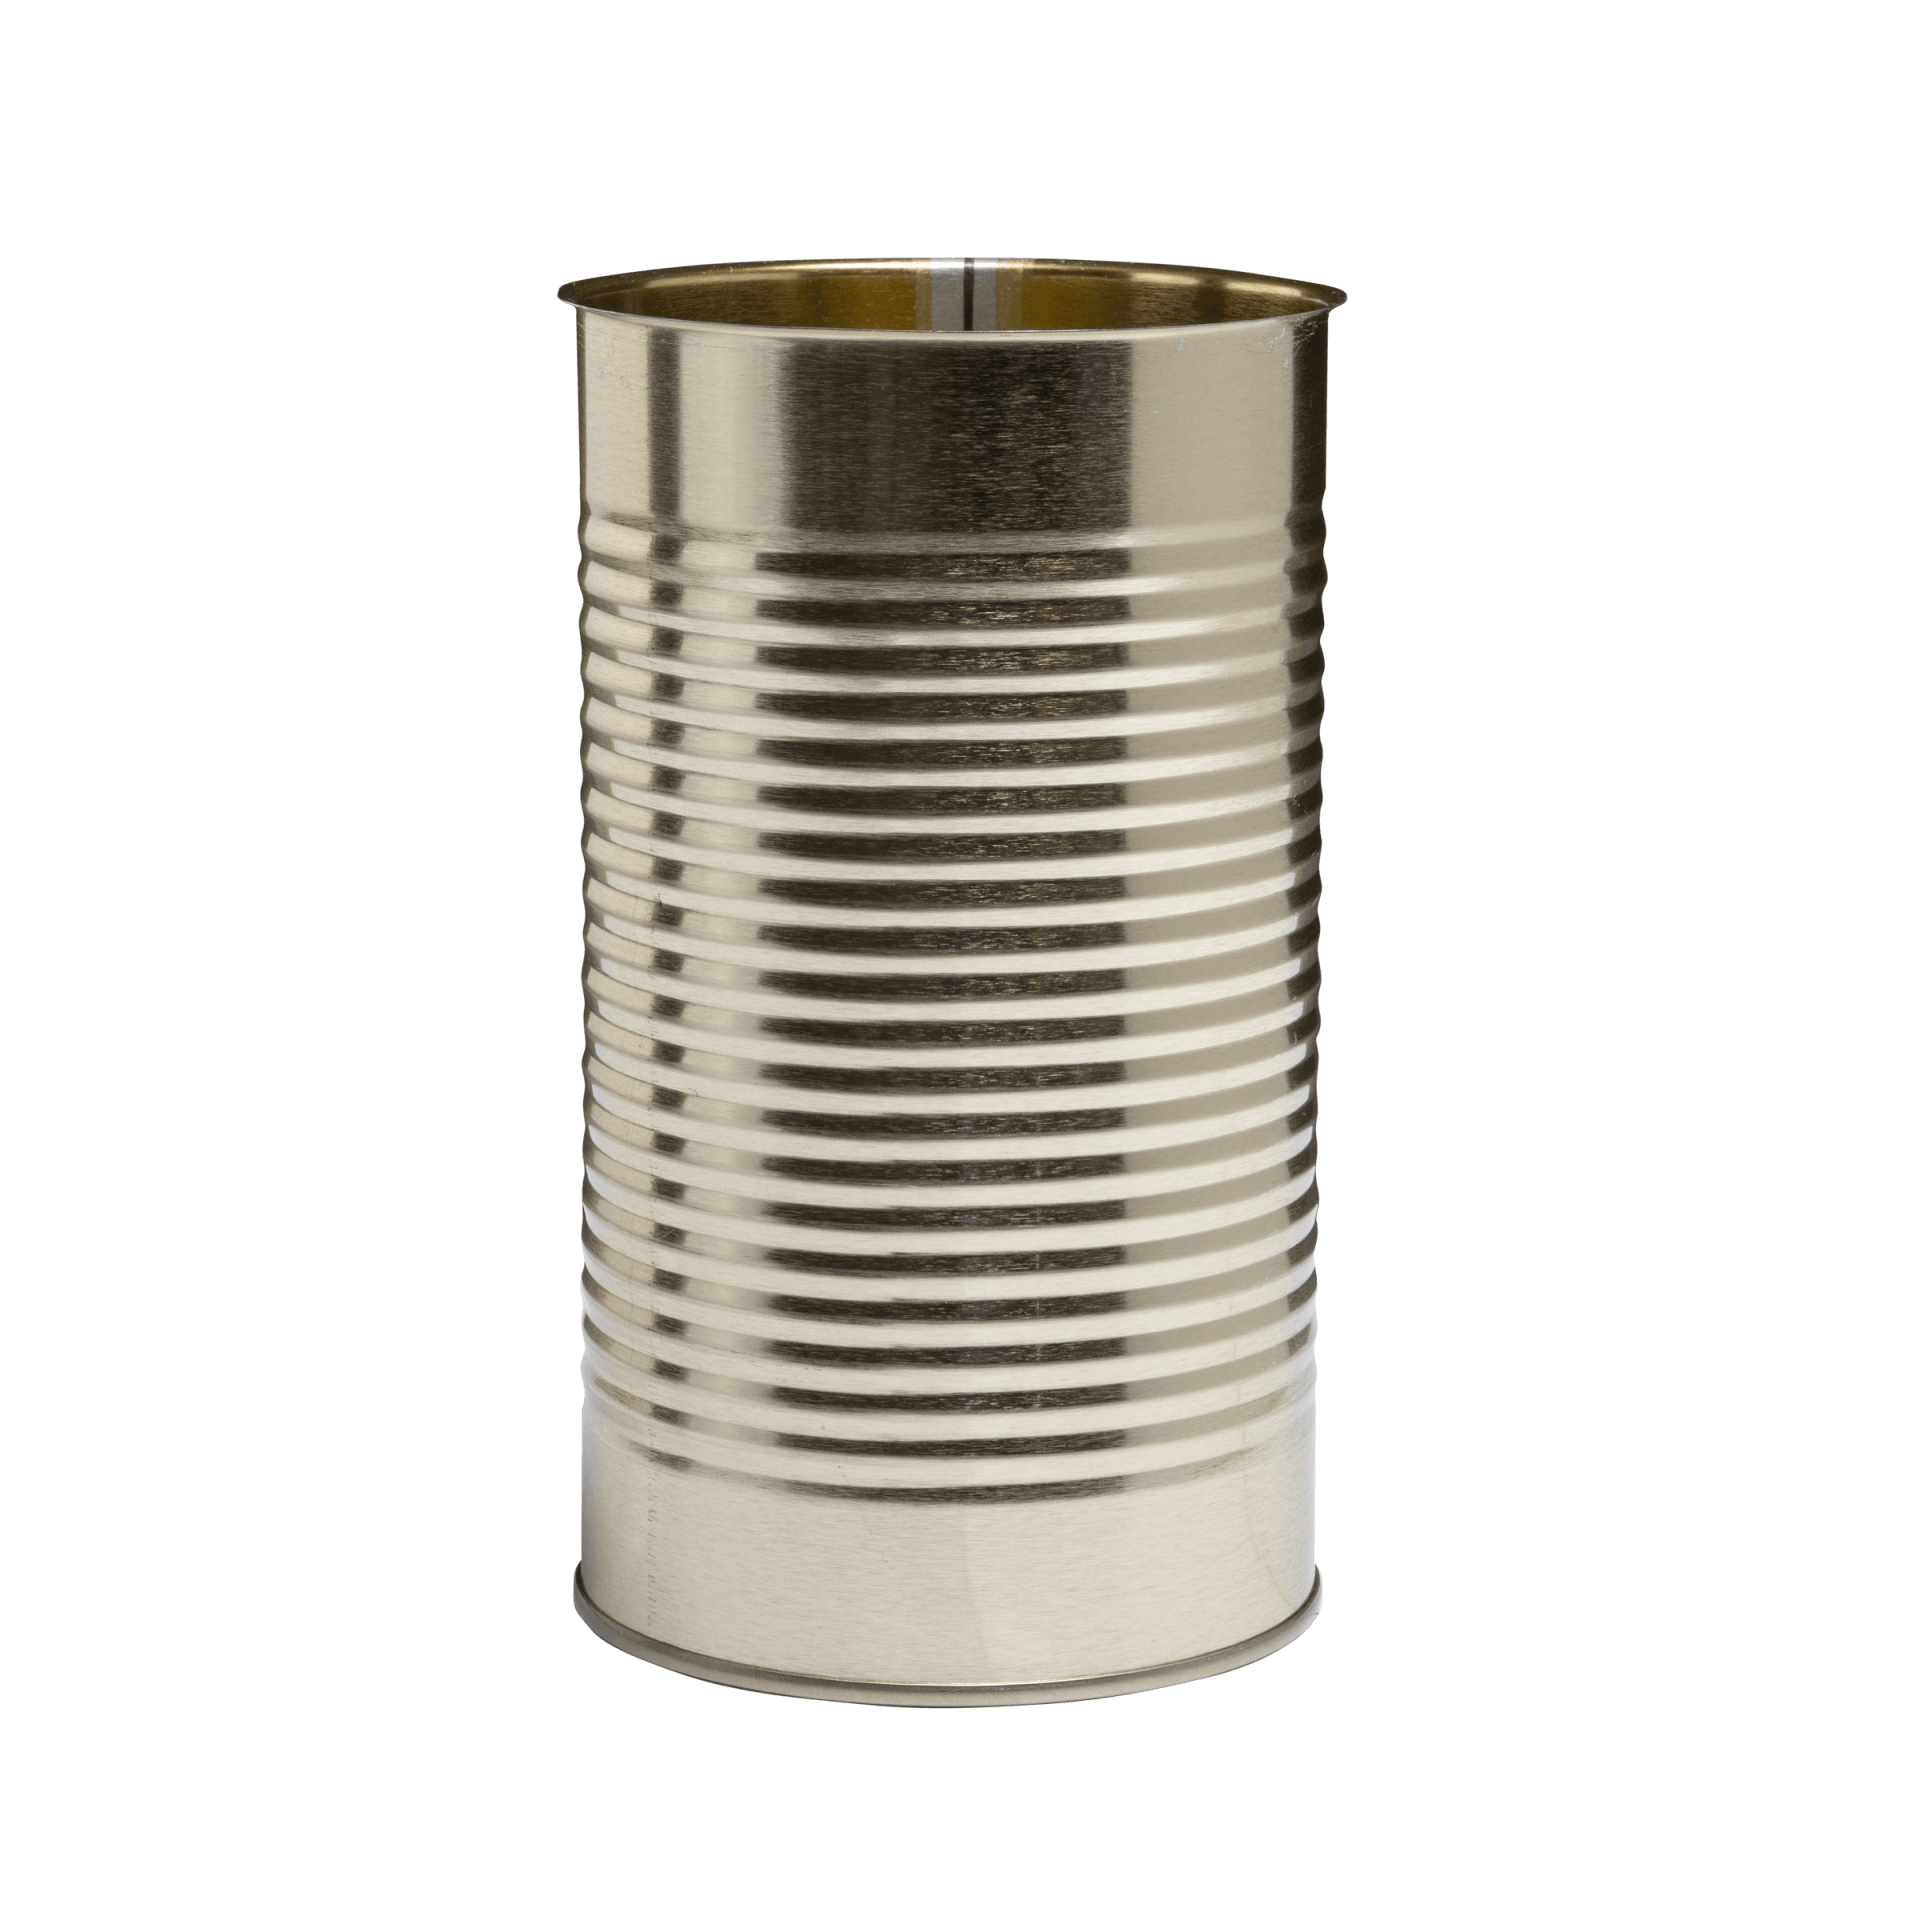 Collection of various tins canned goods food metal